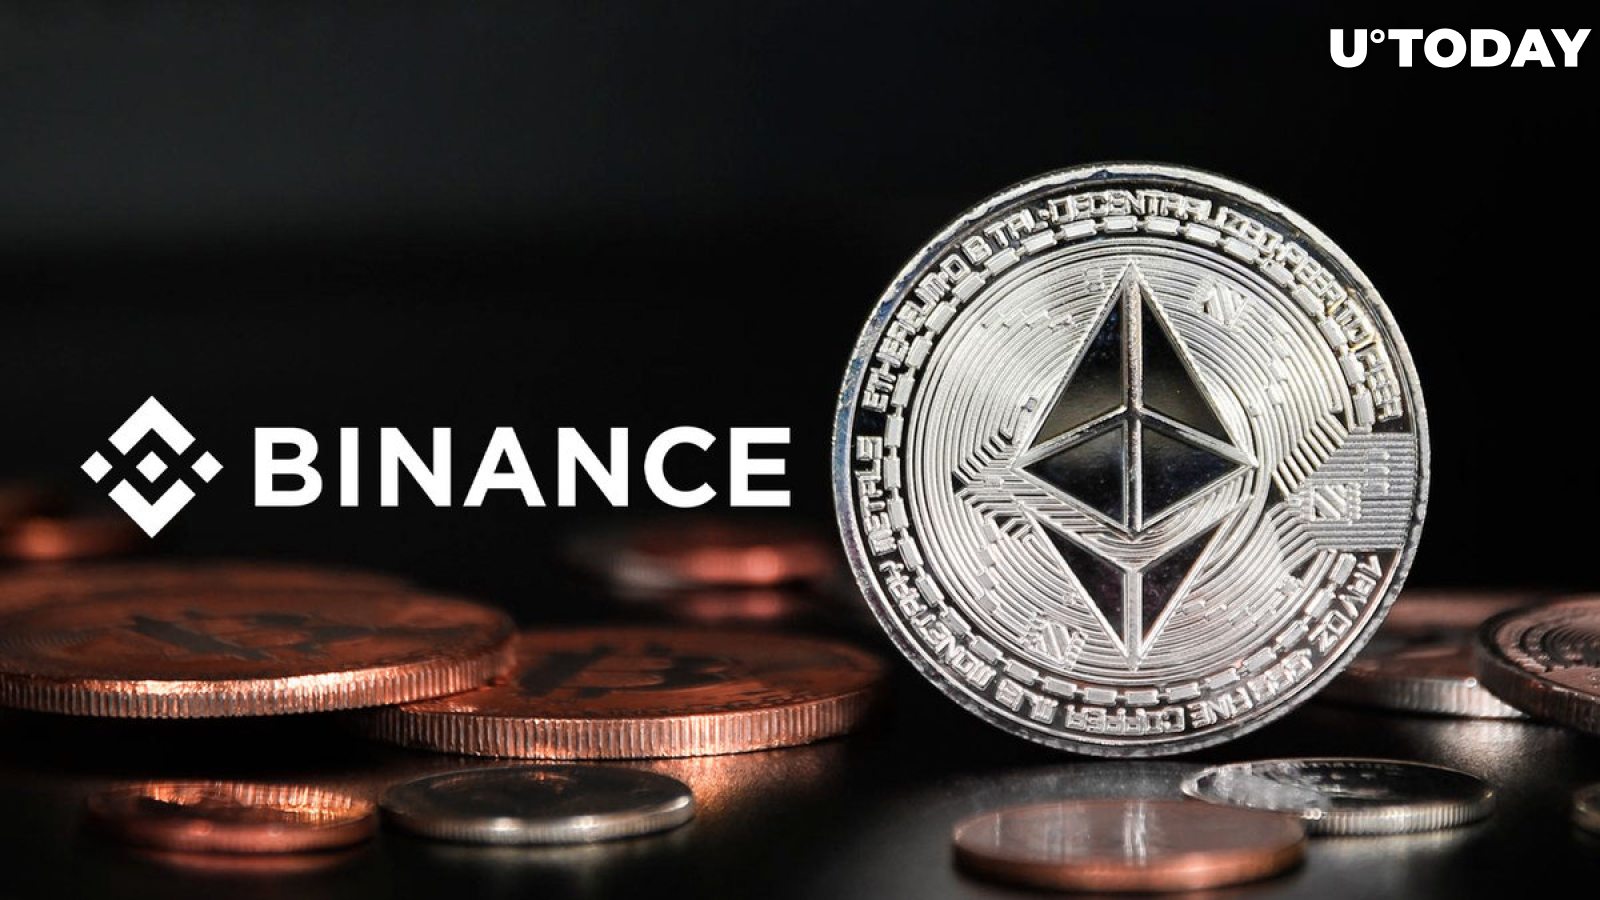 Ethereum (ETH) Withdrawals to Be Temporarily Suspended by Binance, Here's Why